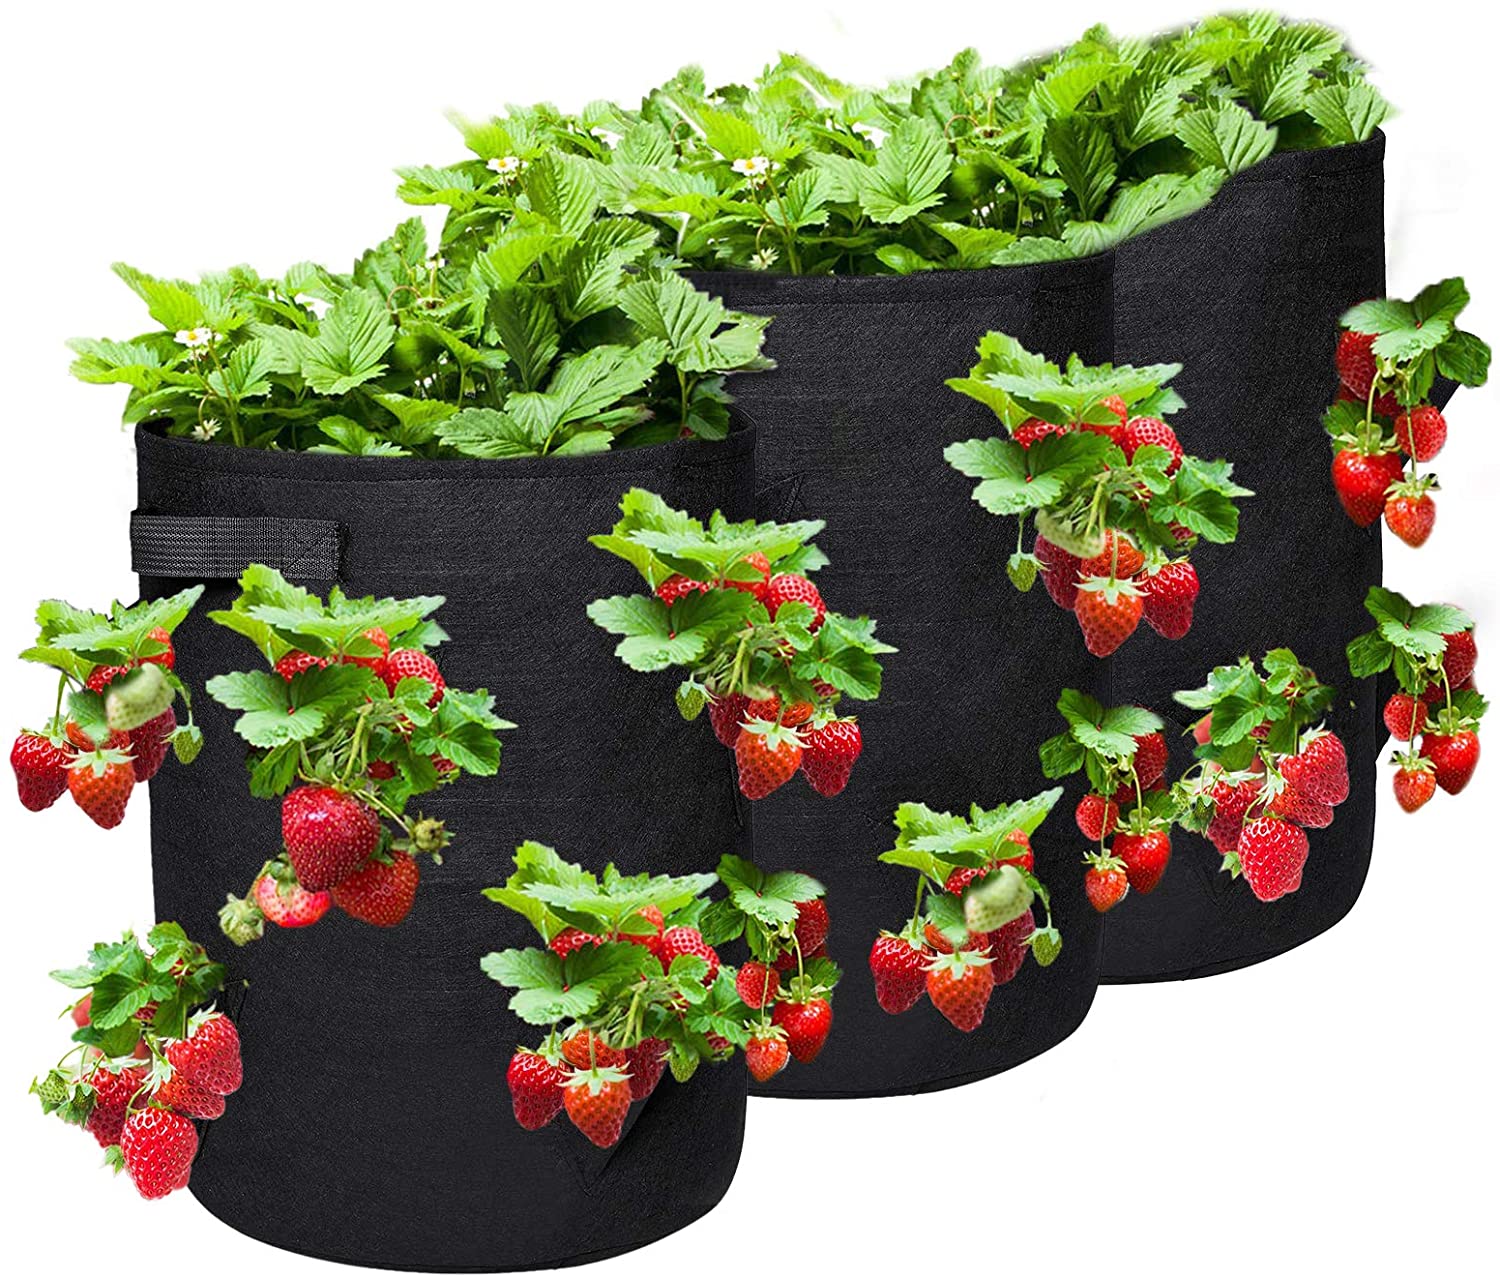 Grow bags can be used to cultivate herbs, fruits, vegetables, and flowers.